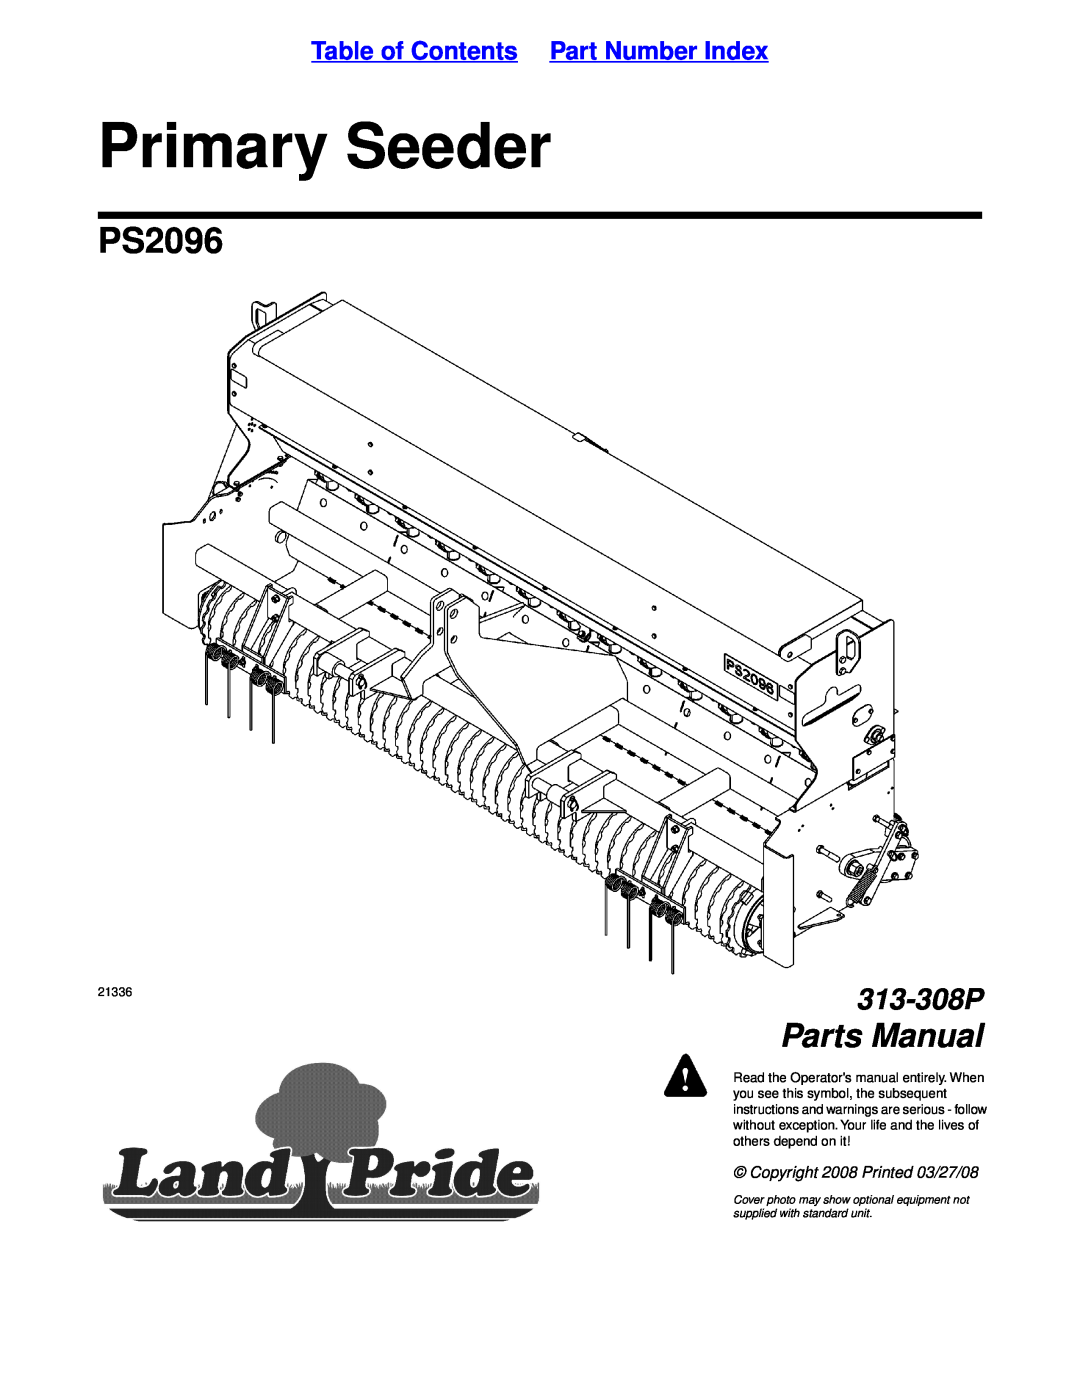 Land Pride PS2096 manual Table of Contents Part Number Index, Primary Seeder, Parts Manual, 313-308P, others depend on it 